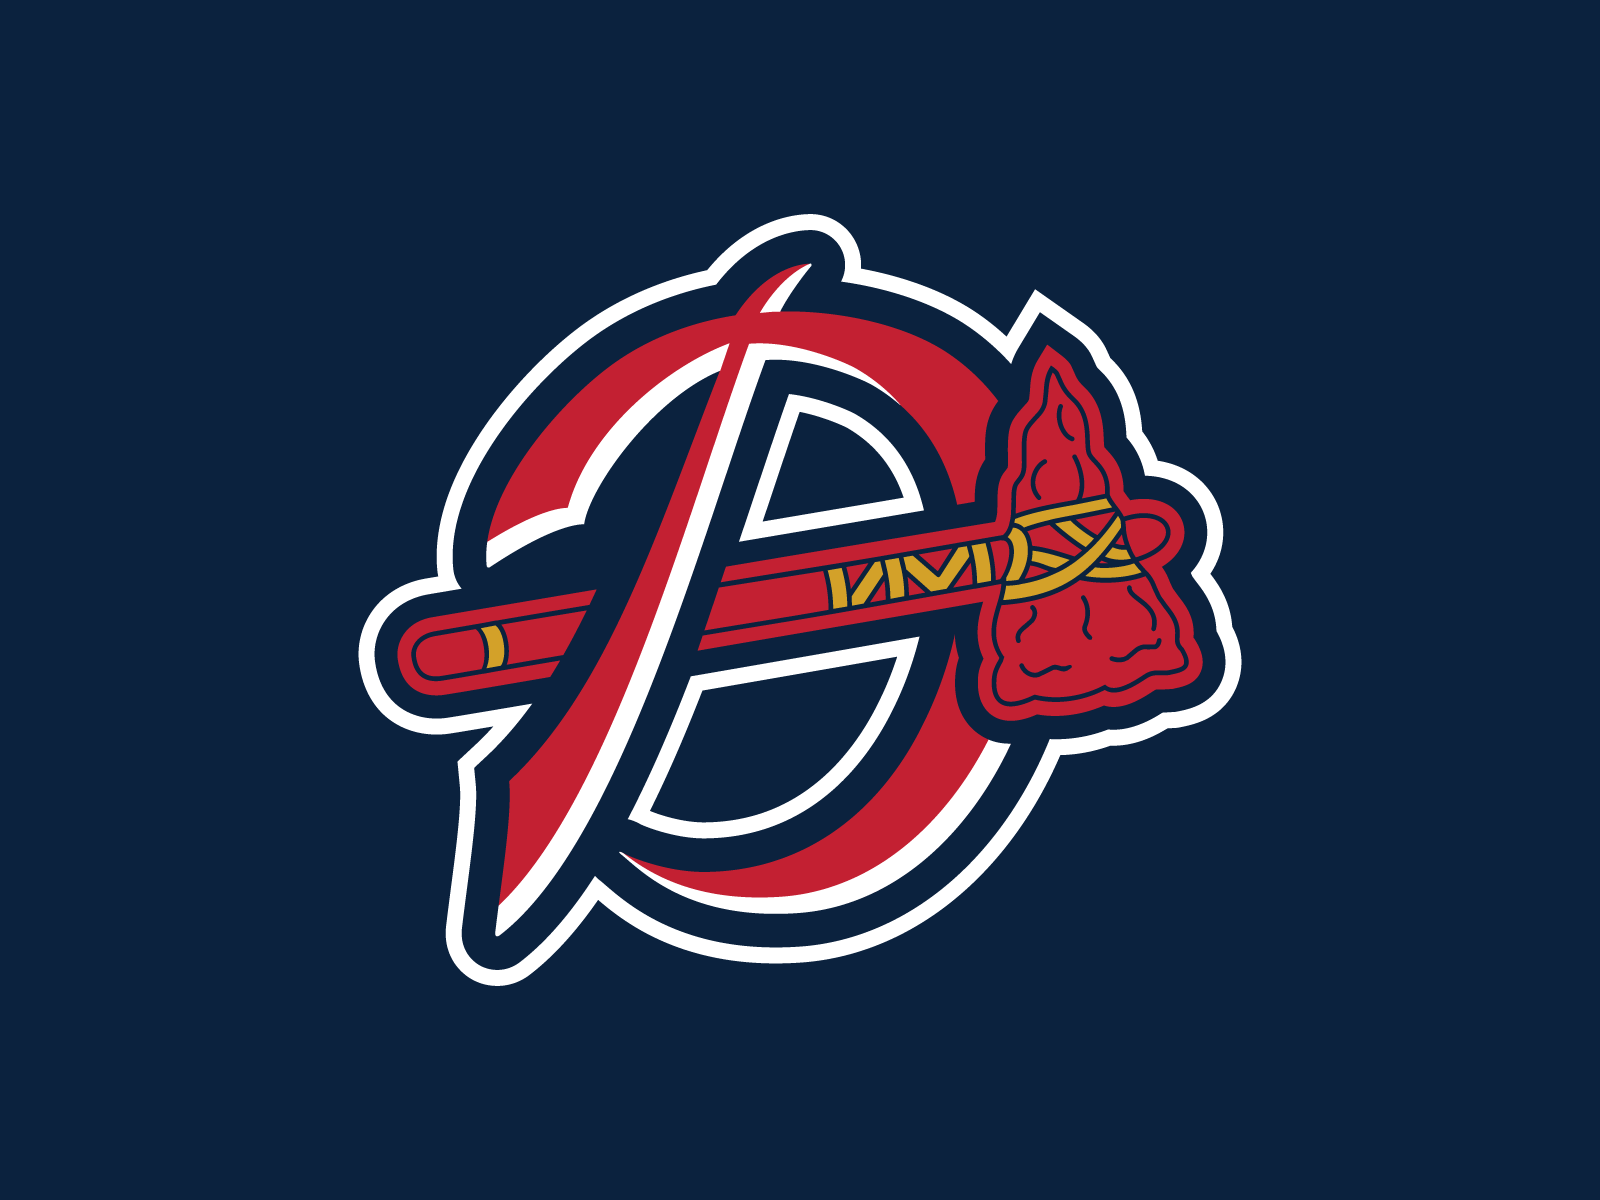 Danville Braves by Harley Creative on Dribbble